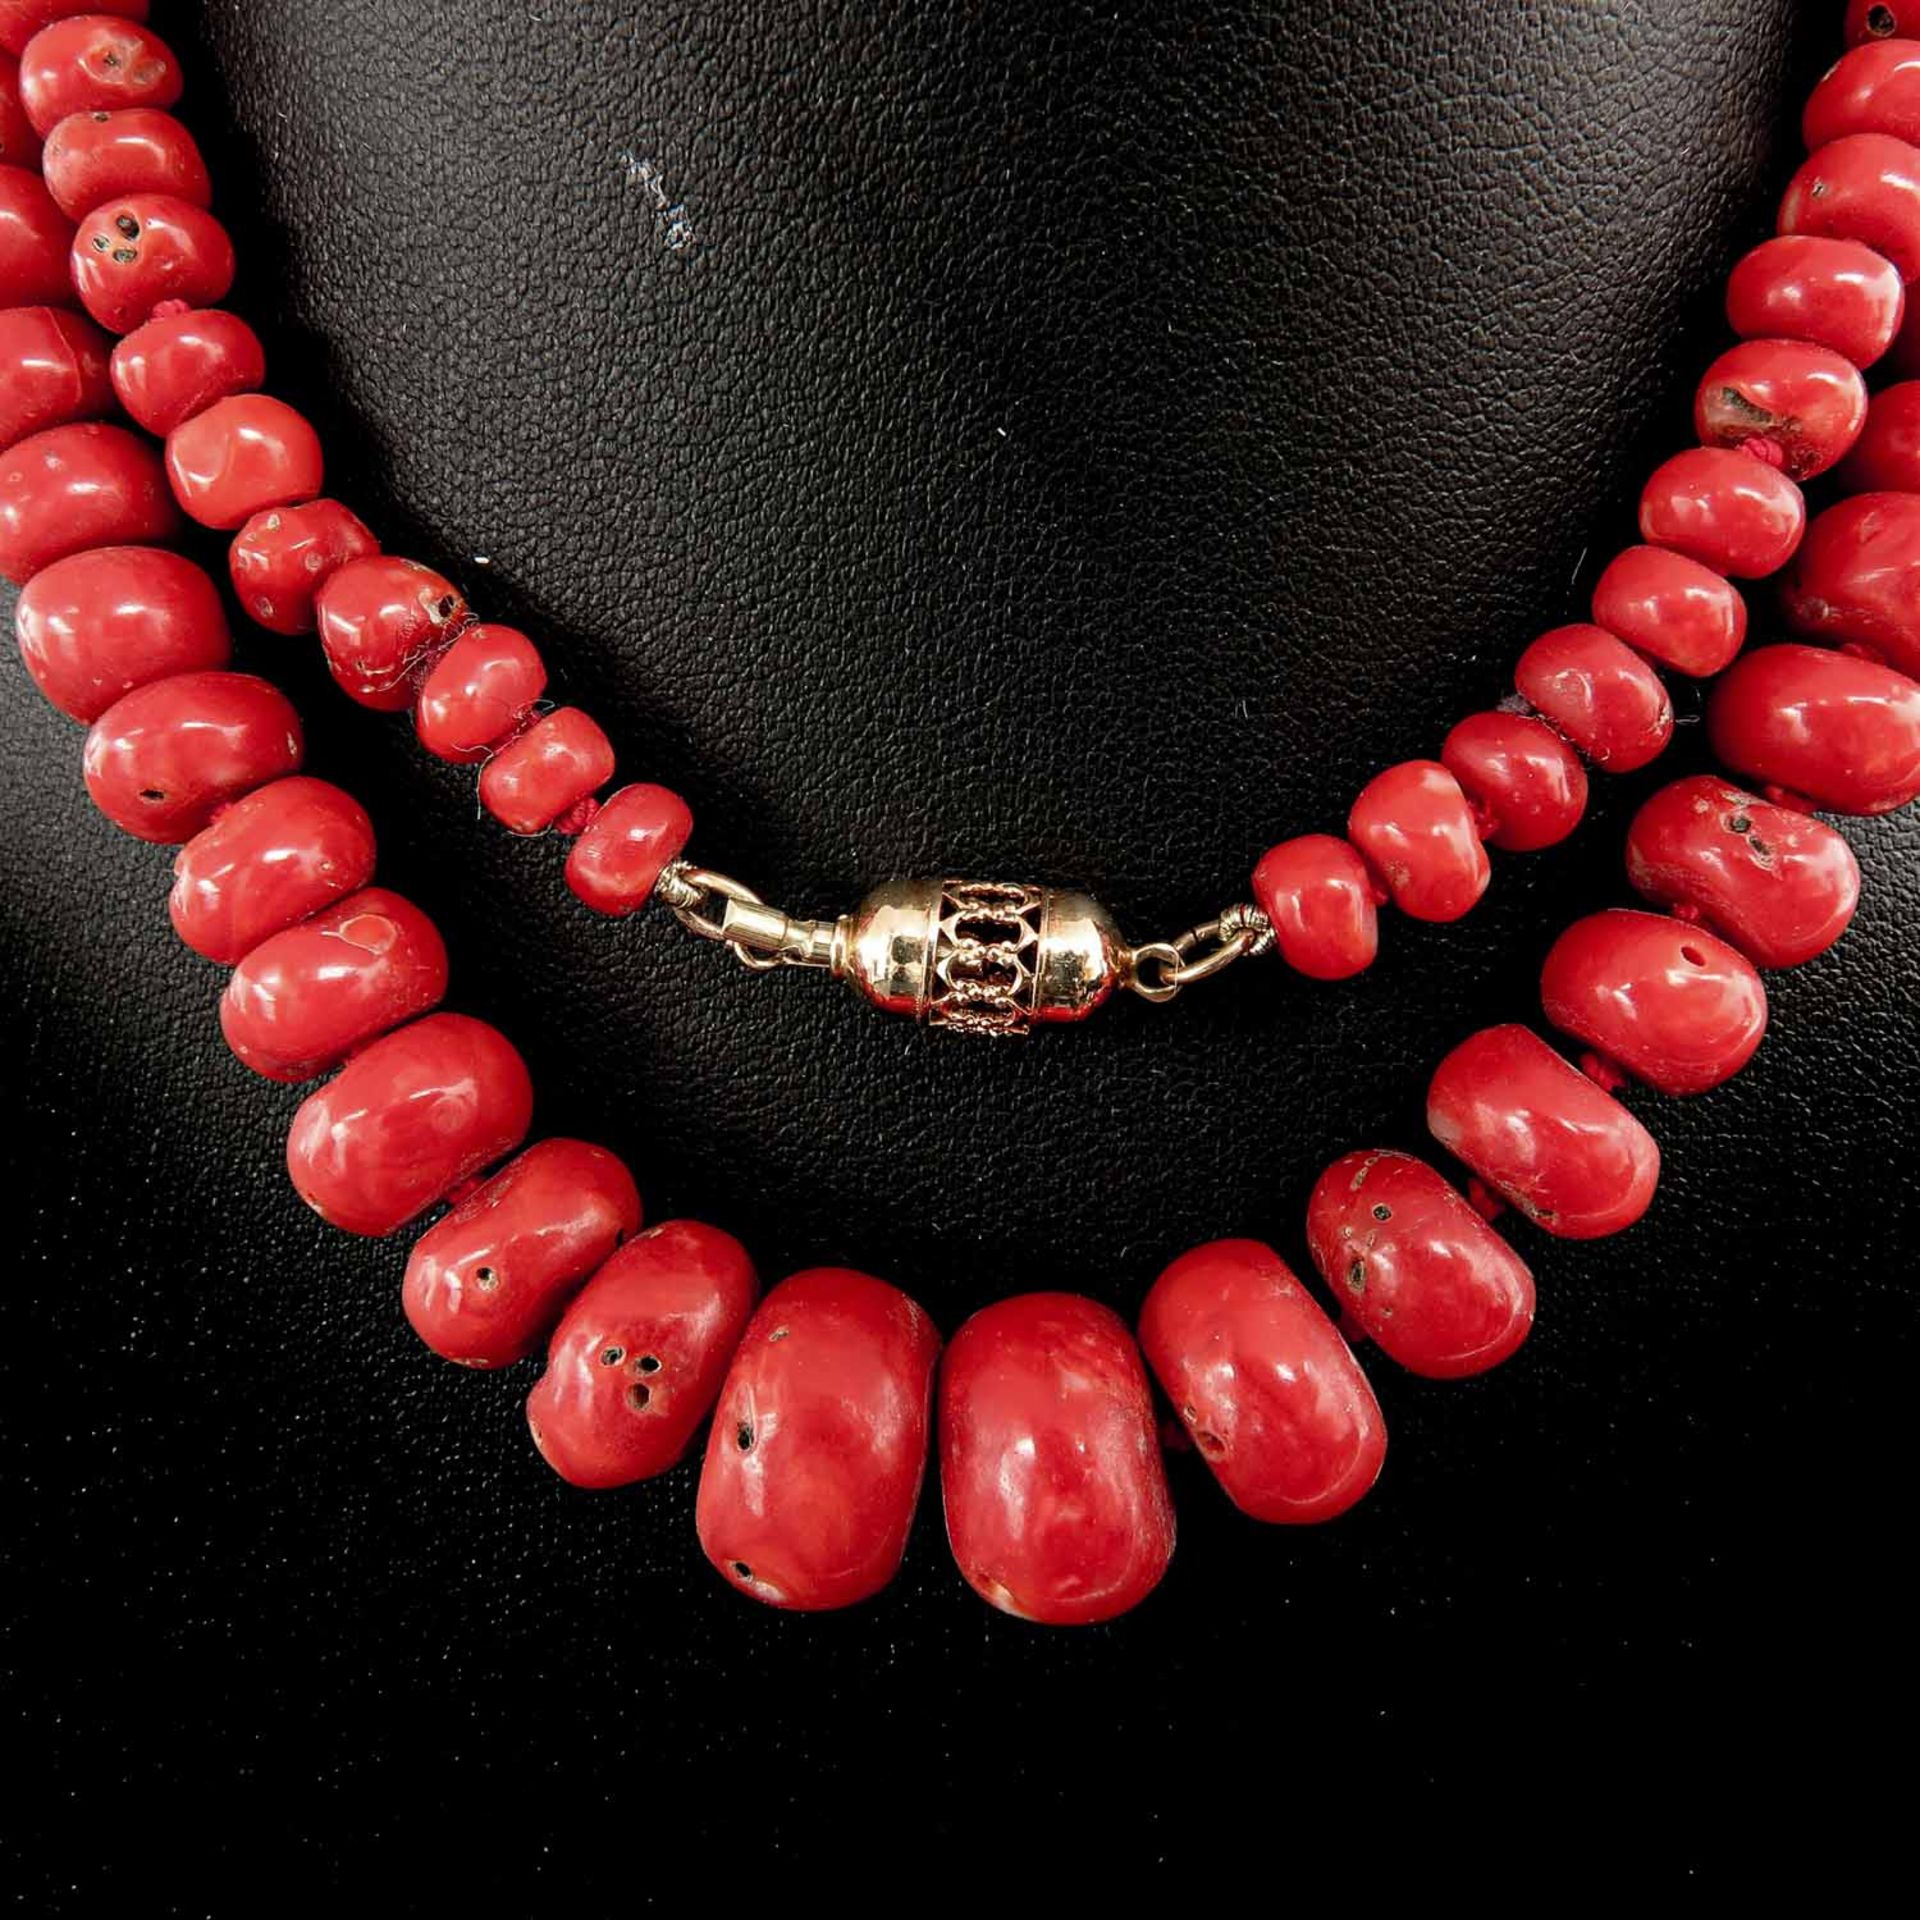 A Single Strand Deep Red Red Coral Necklace - Image 2 of 5